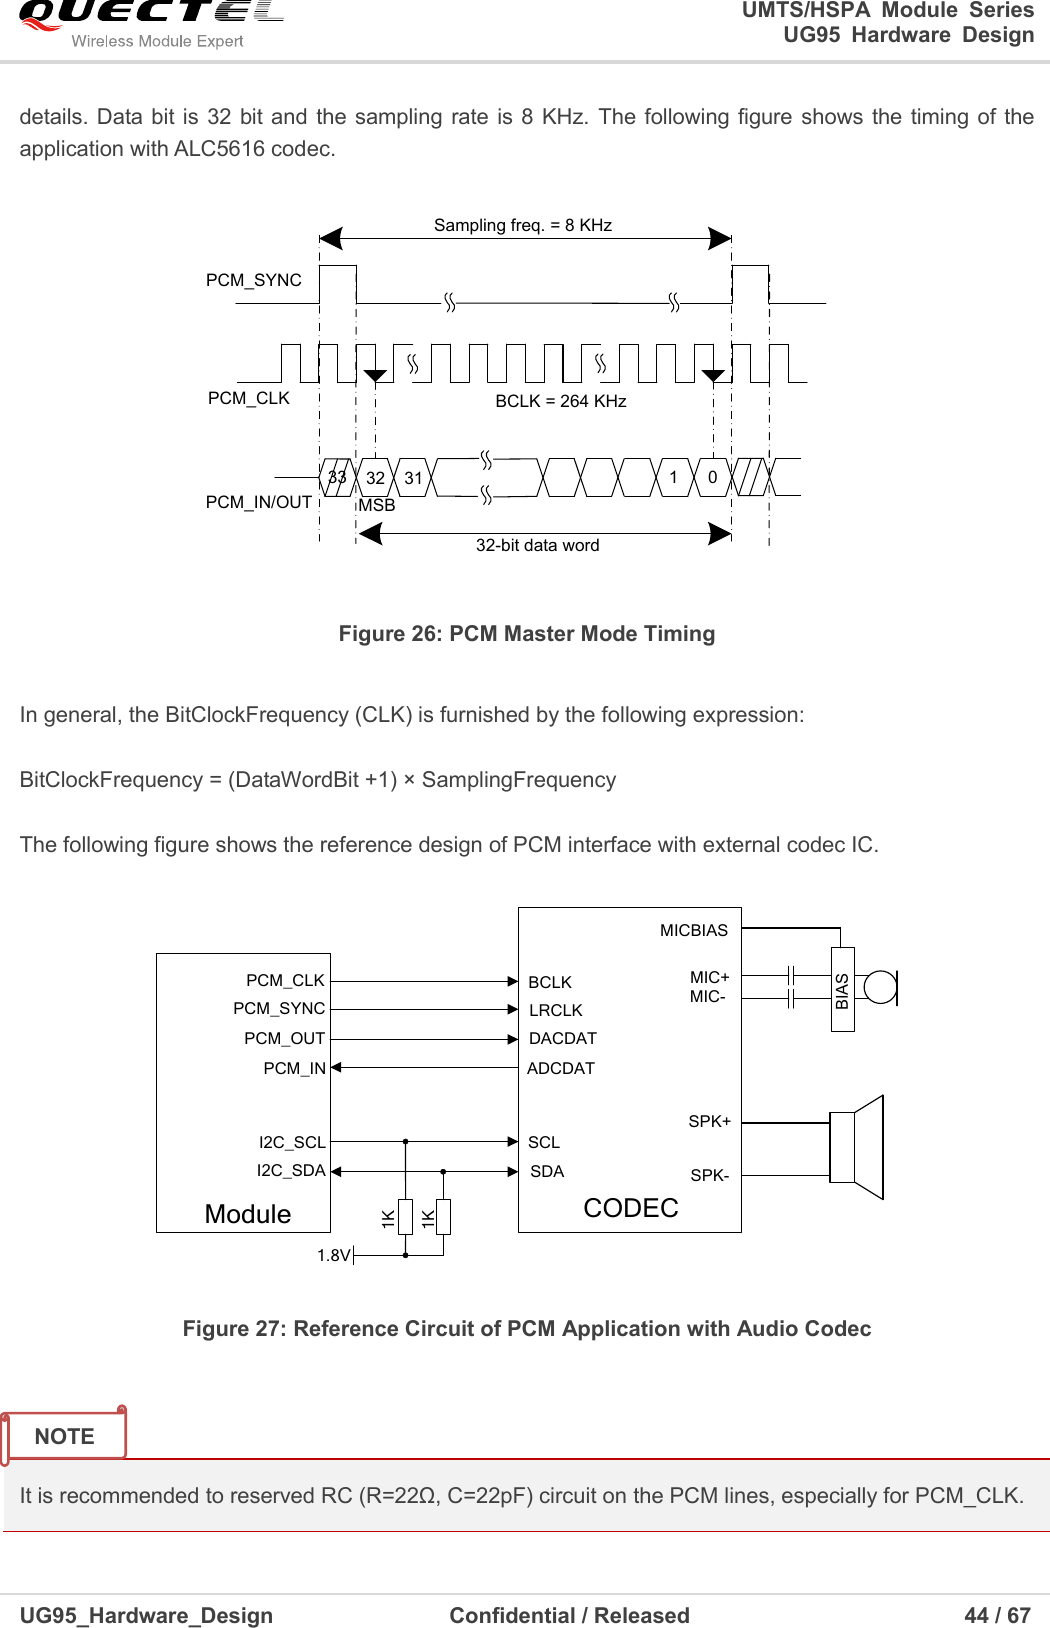                                                                                                                                               UMTS/HSPA  Module  Series                                                                 UG95  Hardware  Design  UG95_Hardware_Design                  Confidential / Released                             44 / 67    details. Data bit is  32 bit and the sampling rate is 8  KHz.  The following figure shows the timing of the application with ALC5616 codec. PCM_CLKPCM_SYNCPCM_IN/OUT32 1 031Sampling freq. = 8 KHz32-bit data wordBCLK = 264 KHz33MSB Figure 26: PCM Master Mode Timing  In general, the BitClockFrequency (CLK) is furnished by the following expression:    BitClockFrequency = (DataWordBit +1) × SamplingFrequency  The following figure shows the reference design of PCM interface with external codec IC.  PCM_INPCM_OUTPCM_SYNCPCM_CLKI2C_SCLI2C_SDACODECModule1.8V1K1KBCLKLRCLKDACDATADCDATSCLSDABIASMICBIASMIC+MIC-SPK+SPK- Figure 27: Reference Circuit of PCM Application with Audio Codec   It is recommended to reserved RC (R=22Ω, C=22pF) circuit on the PCM lines, especially for PCM_CLK. NOTE 